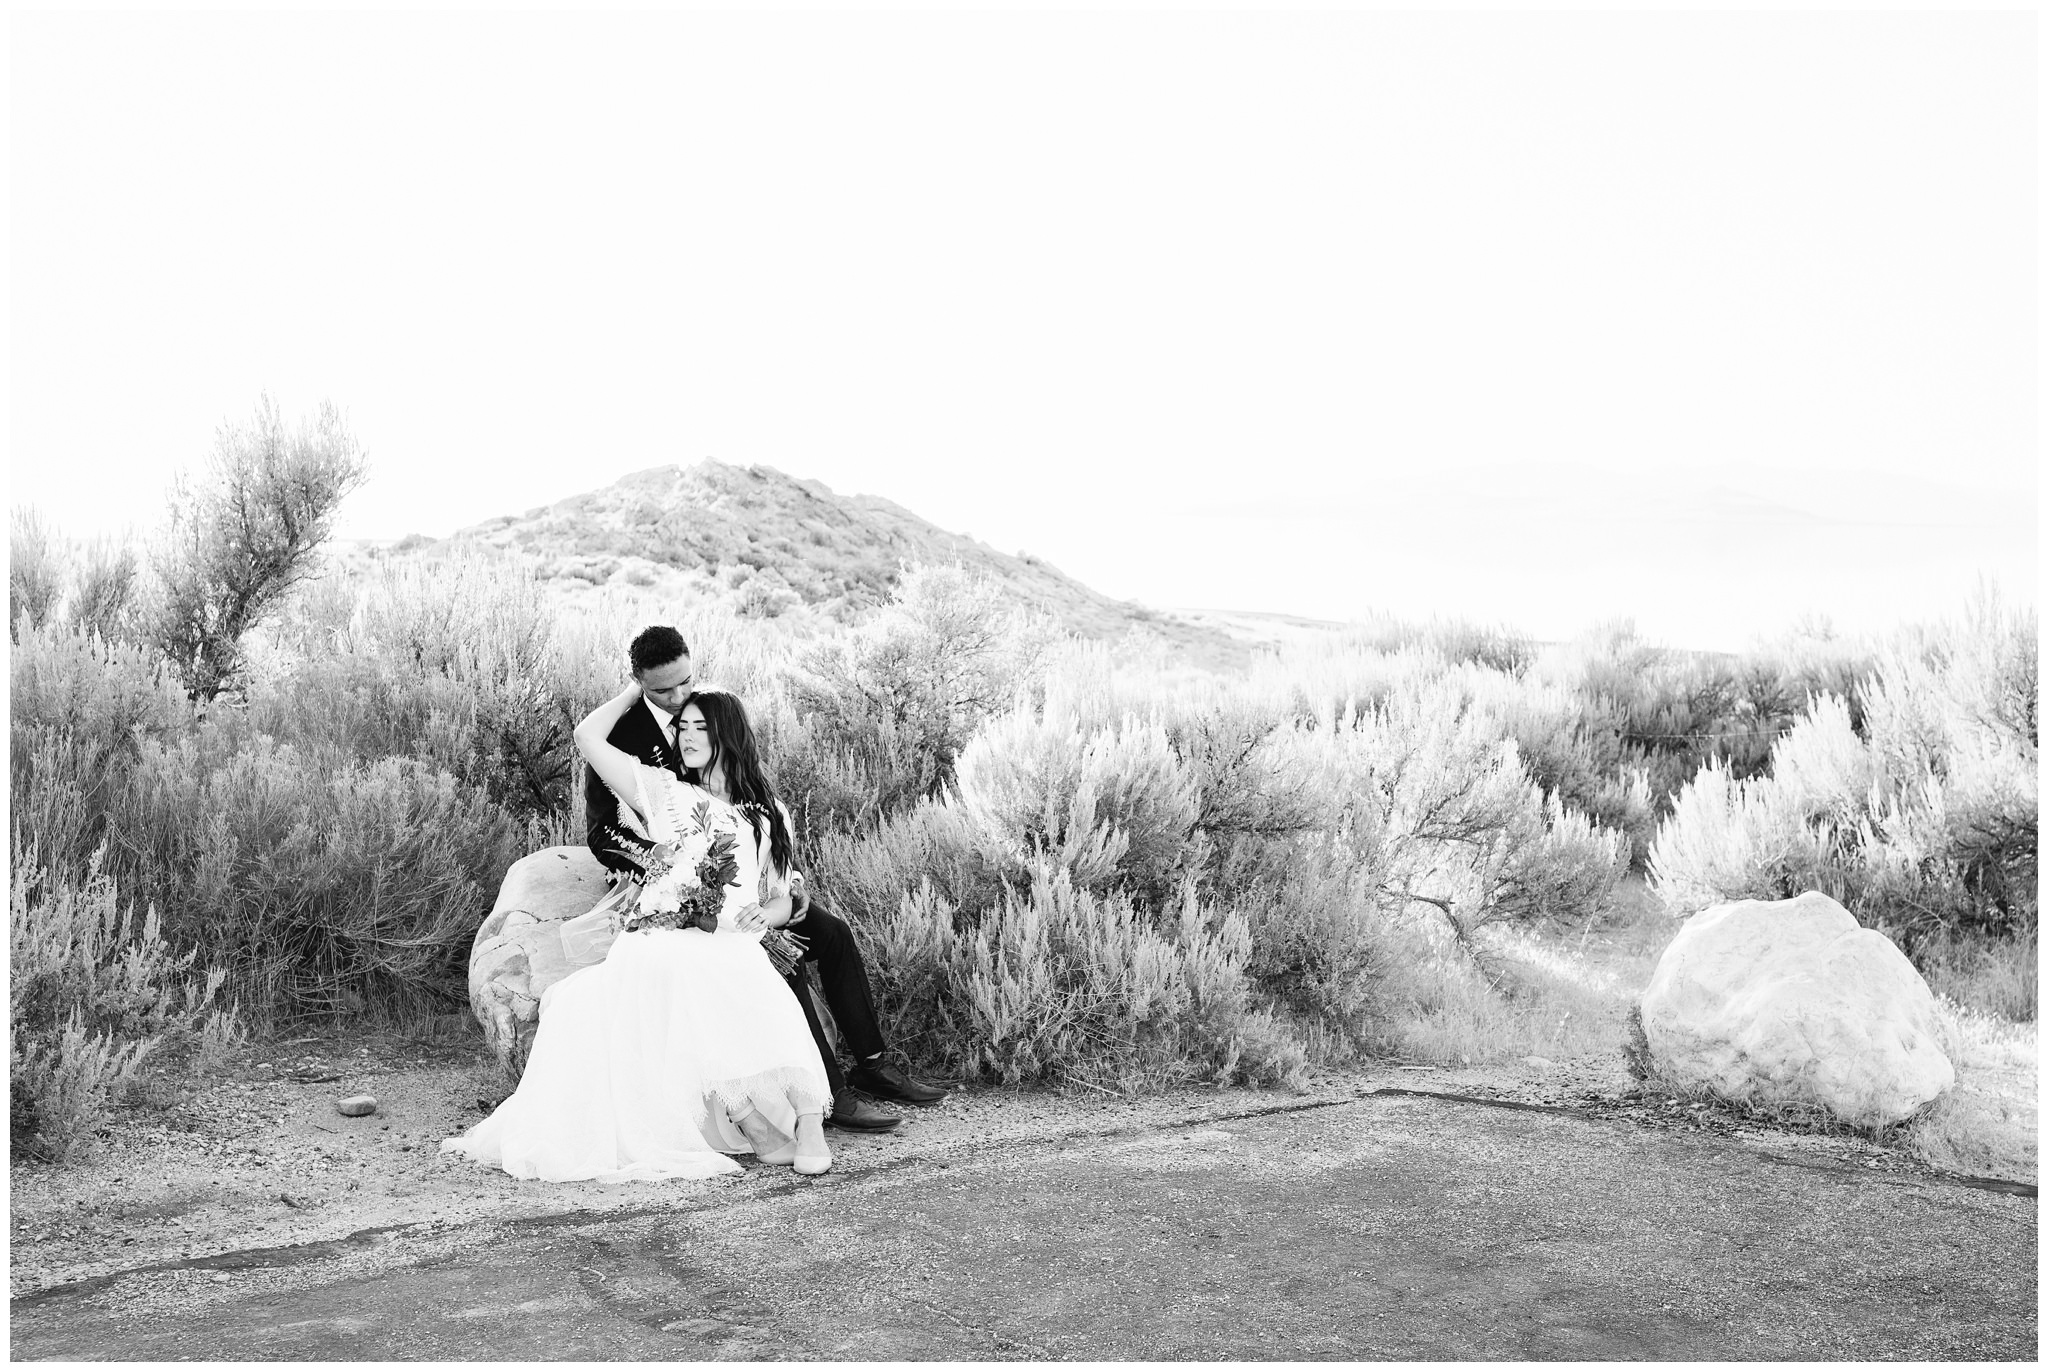 Bride and groom sitting on a rock snuggling at Lady finger point on Antelope island in Utah near SLC